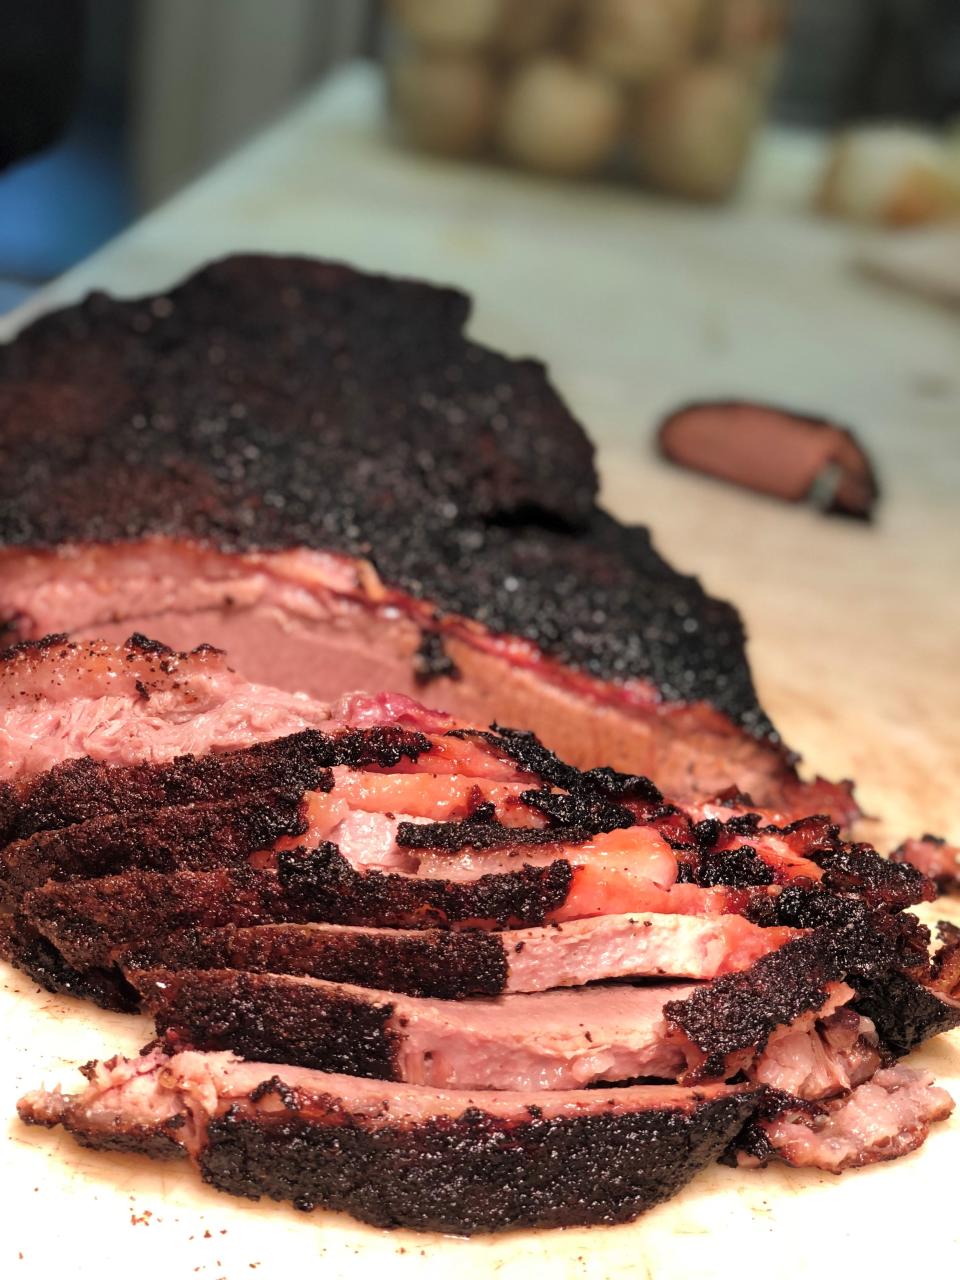 In 2023, Haywood Smokehouse was ranked No. 1 on Yelp's Top Brisket in the U.S. and Canada. The WNC restaurant has locations in Dillsboro, Franklin and Waynesville.